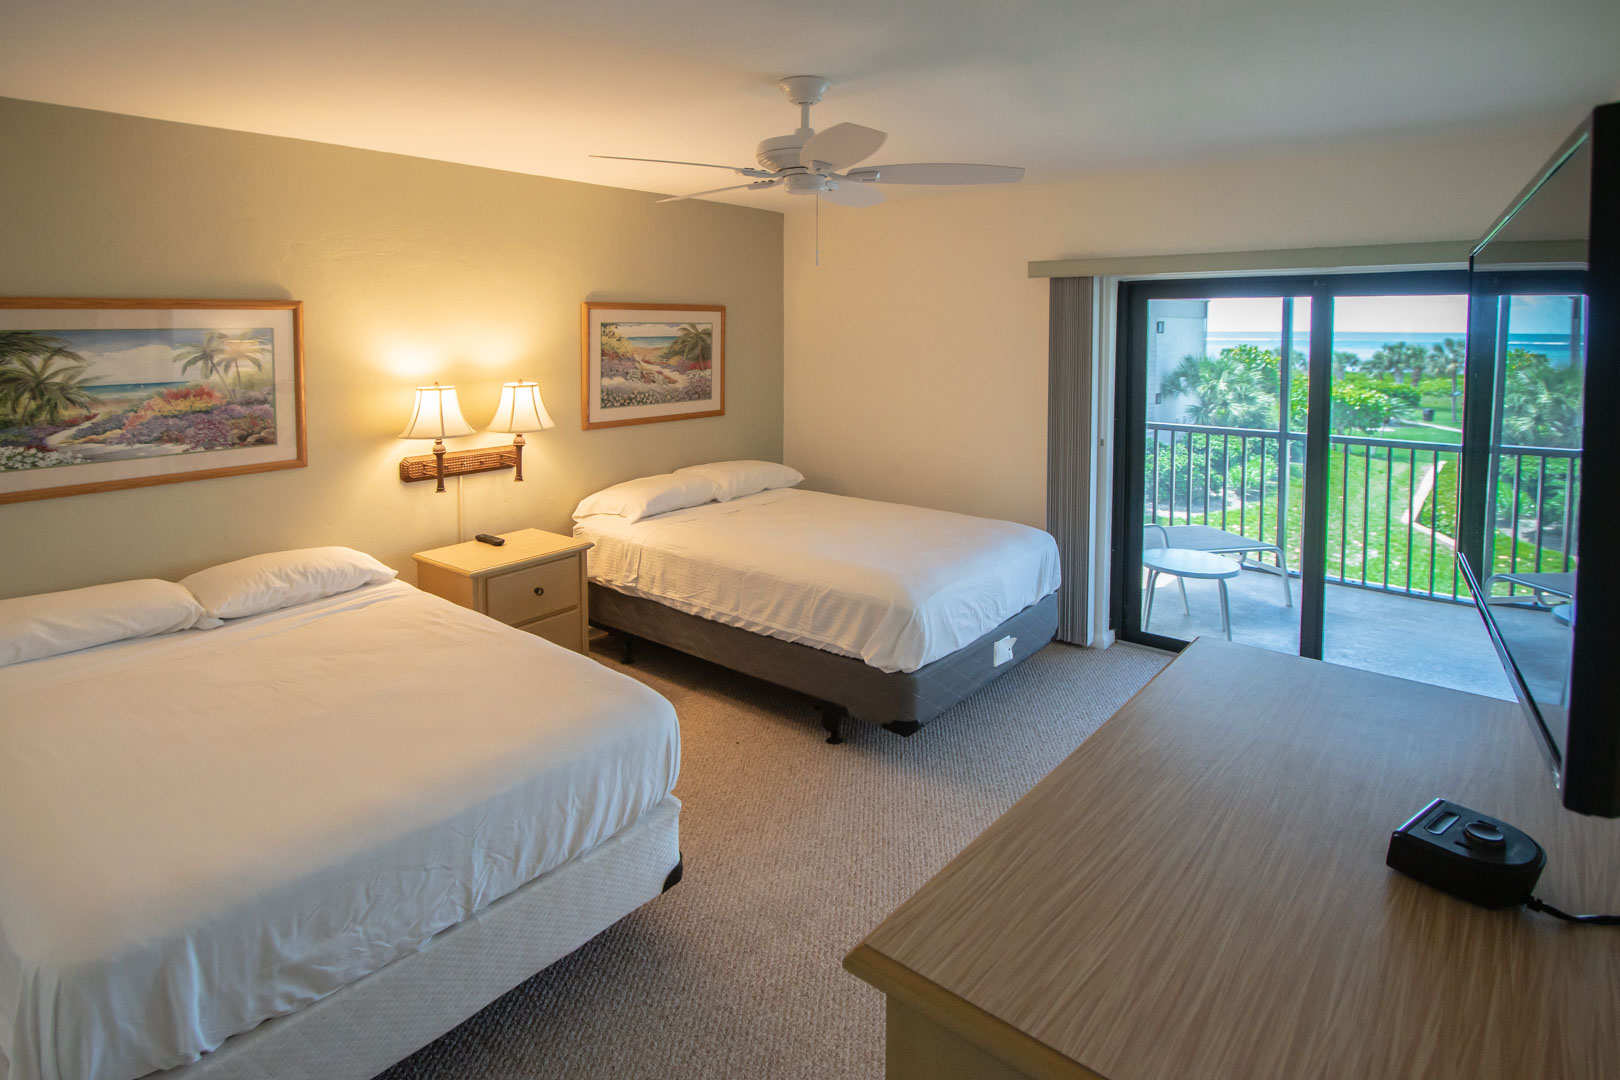 A spacious bedroom with double beds at VRI's Sanibel Beach Club in Sanibel Island, Florida.